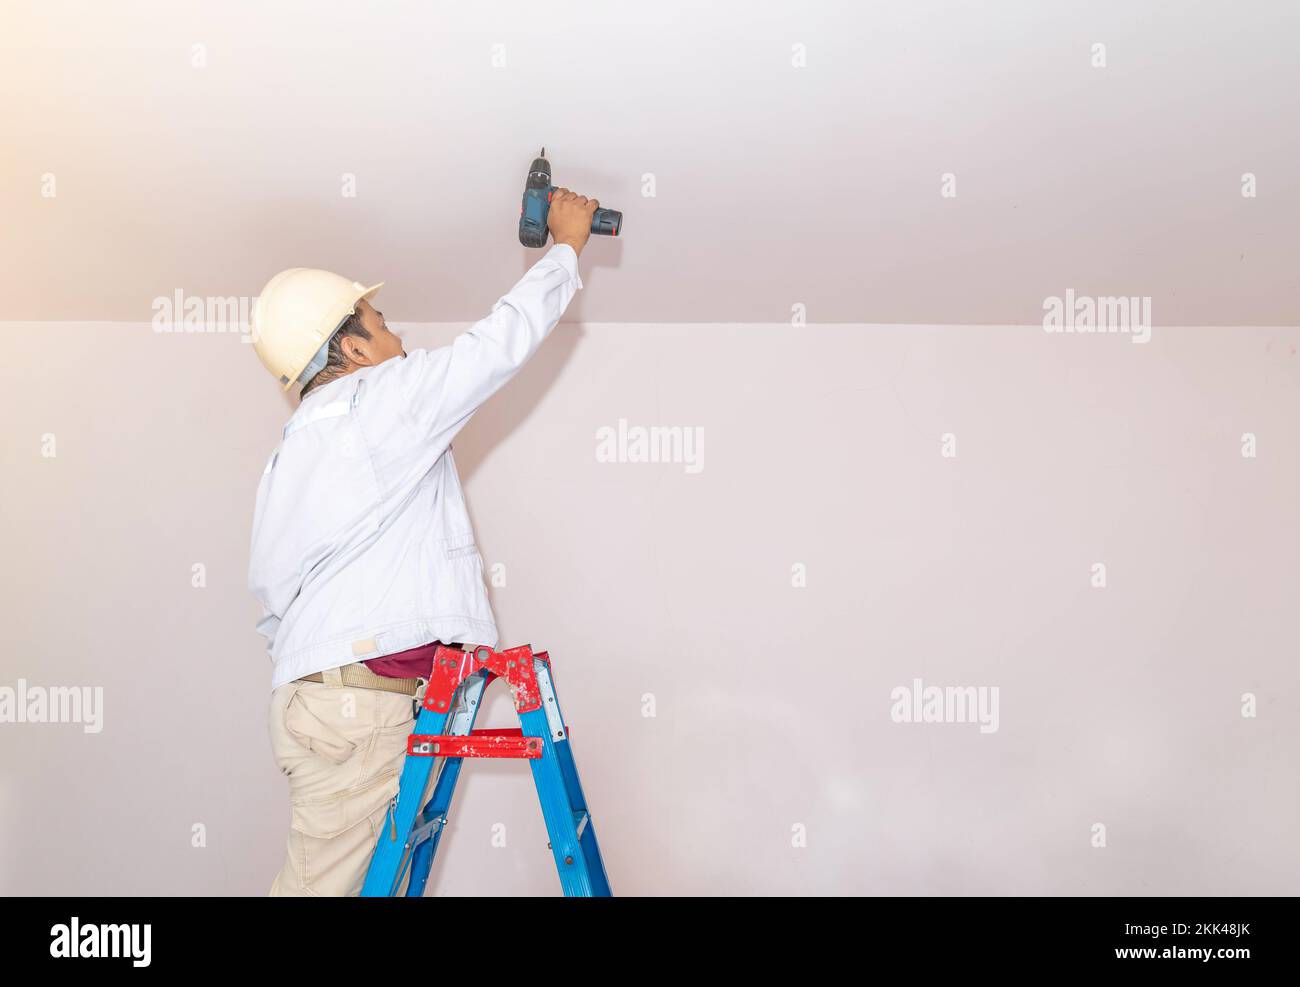 Craftsman technician are repair drilling or fixing ceiling the wire socket with electrical drill or screwdriver. Stock Photo